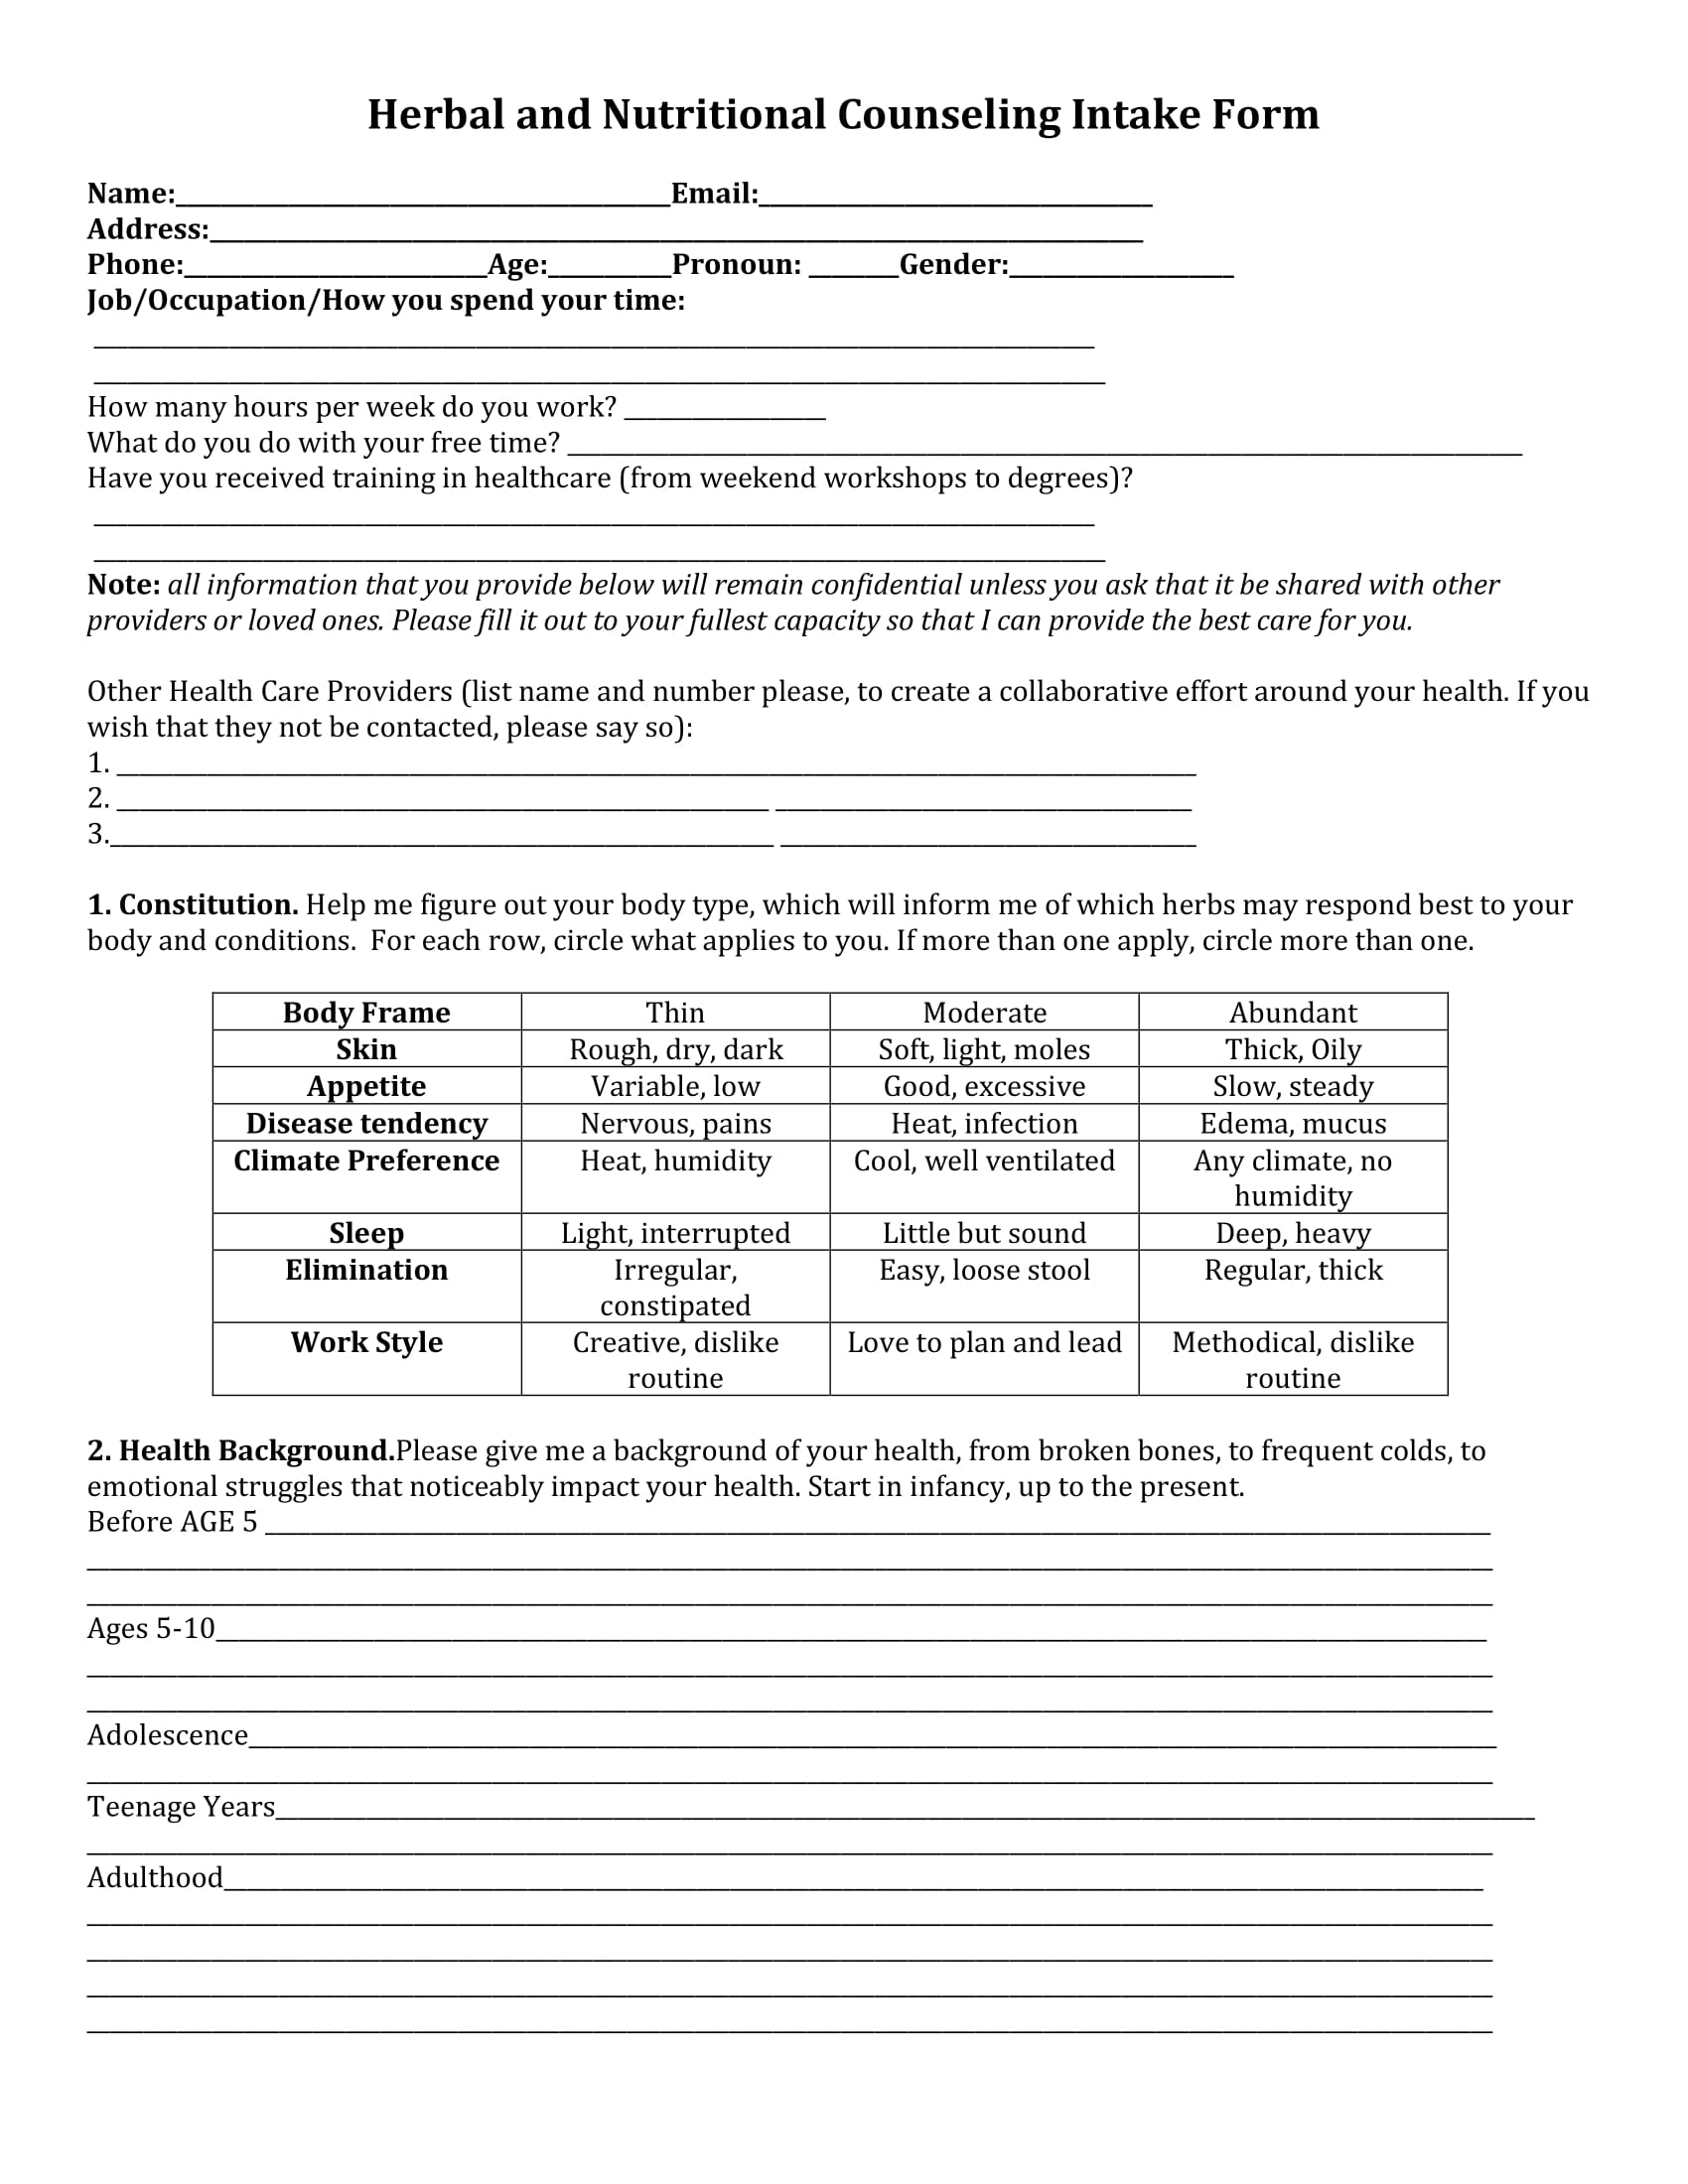 nutritional counseling intake form 1